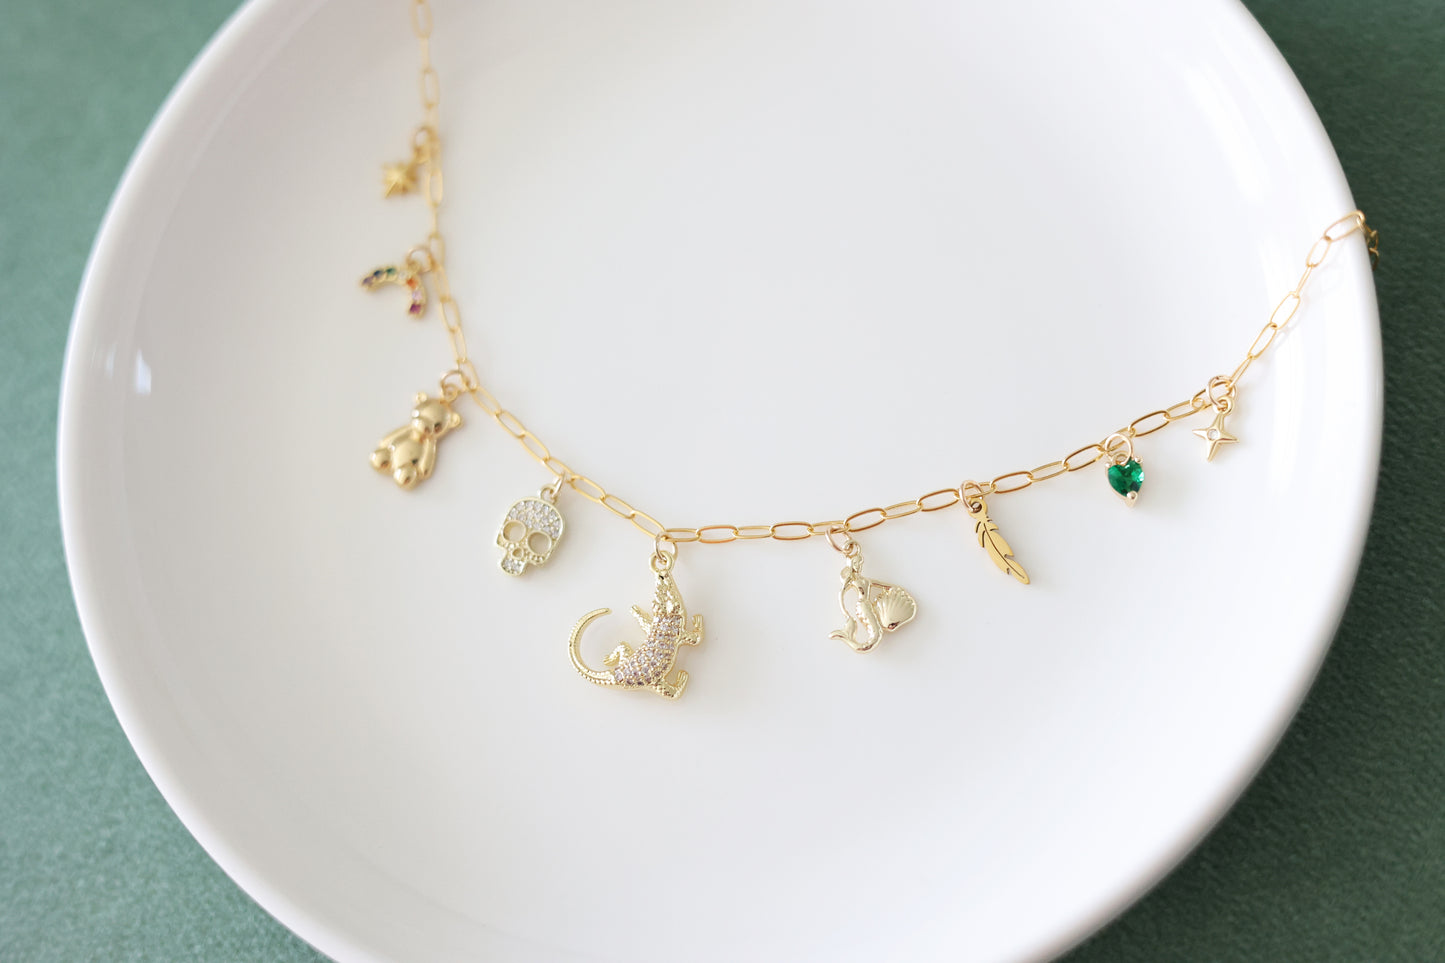 Pixie Dust Collection - Neverland Charm Necklace